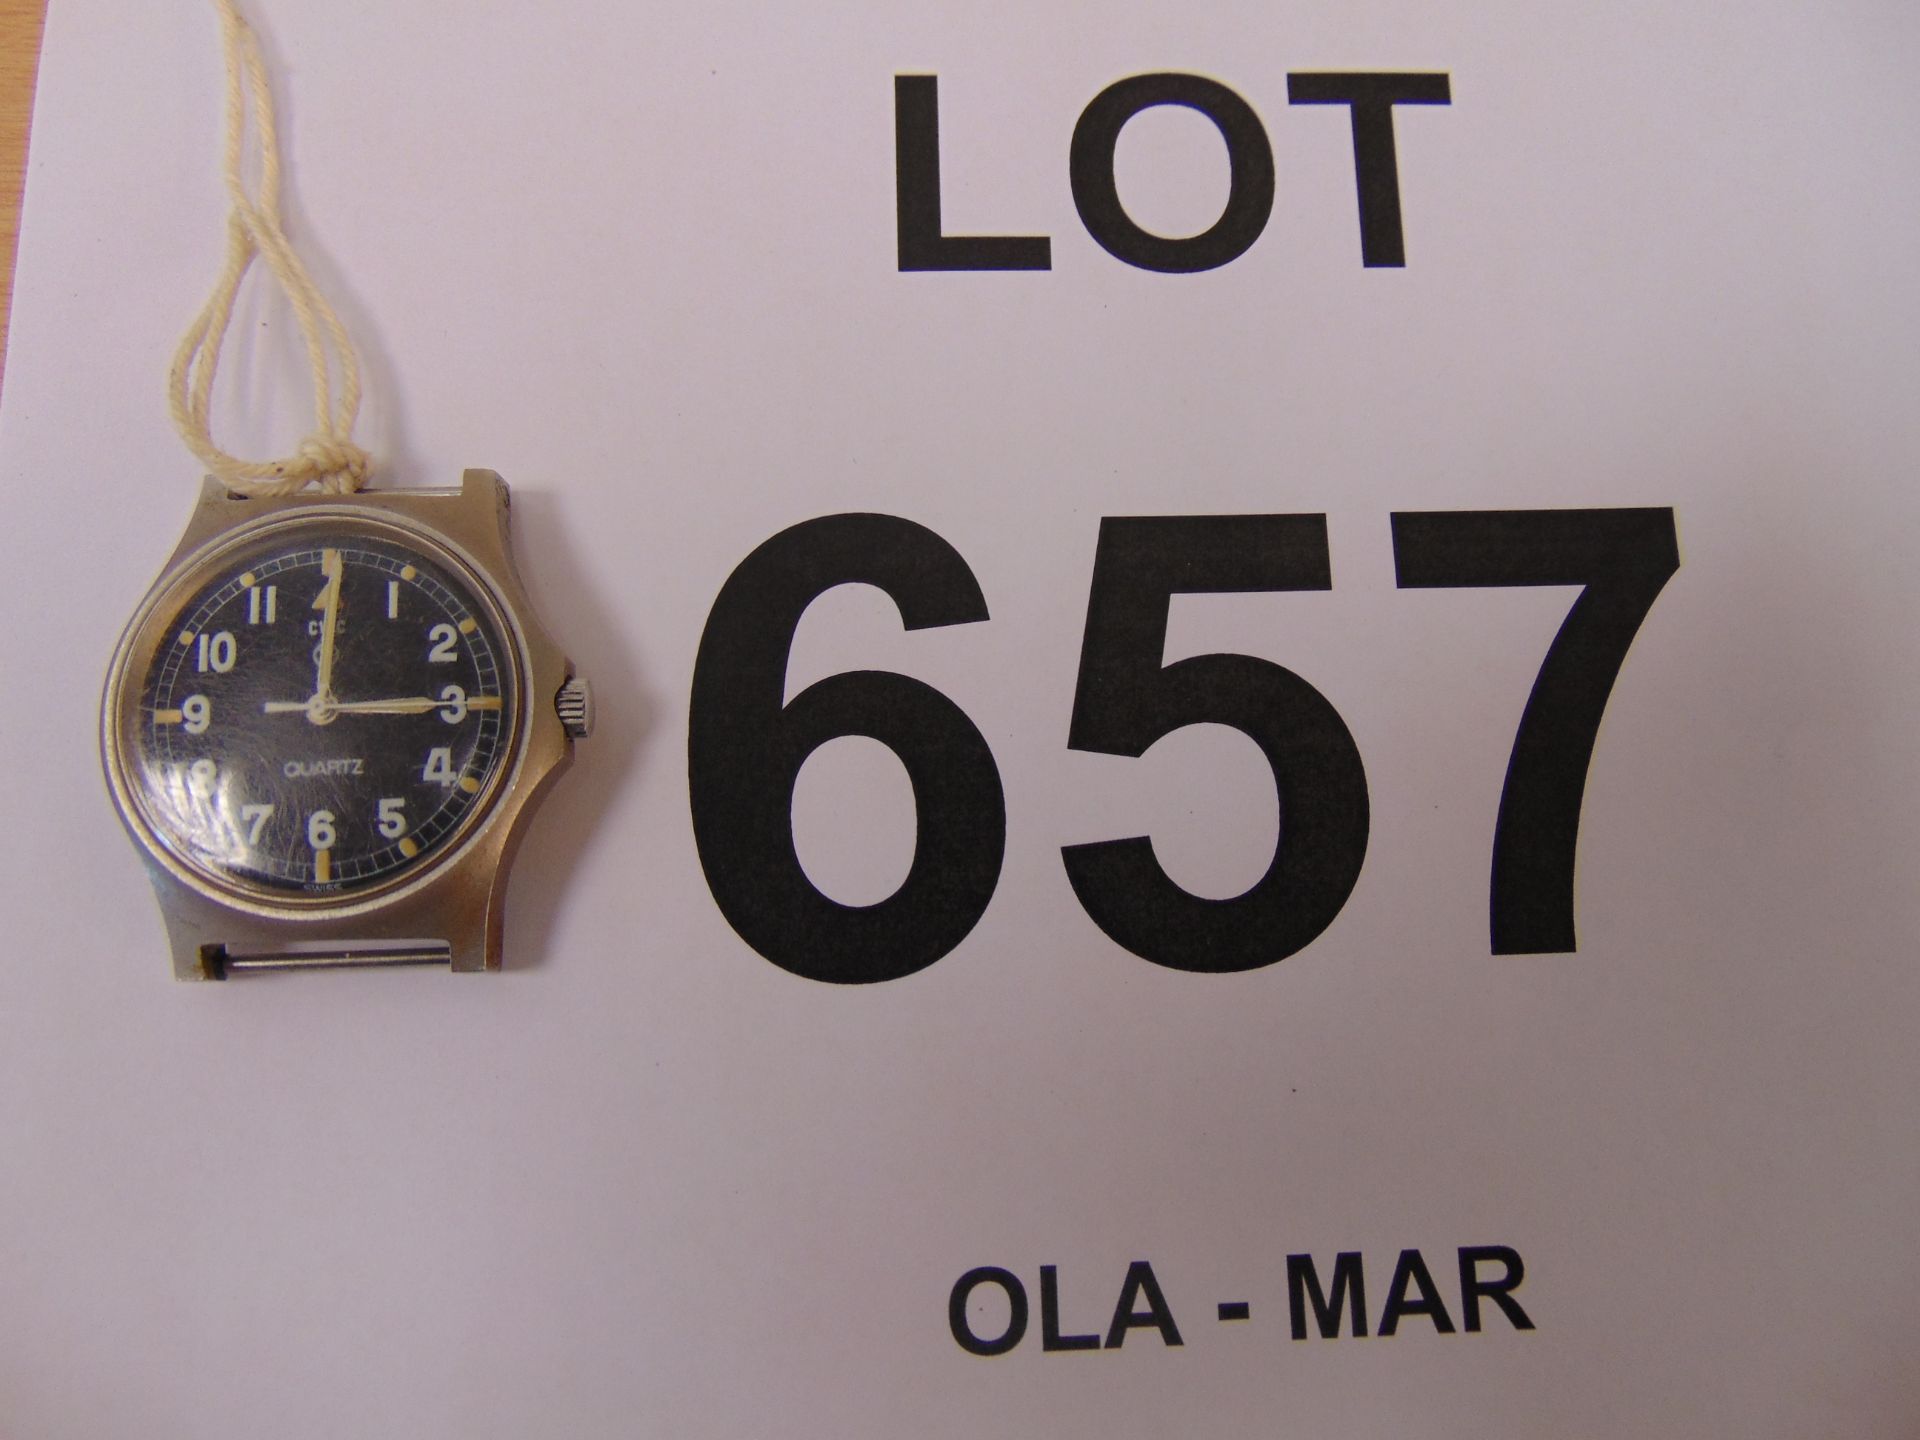 V Rare CWC British Army Service Watch FAT BOY Nato Marks, Date 1980, * FALKLANDS WAR * - Image 4 of 4